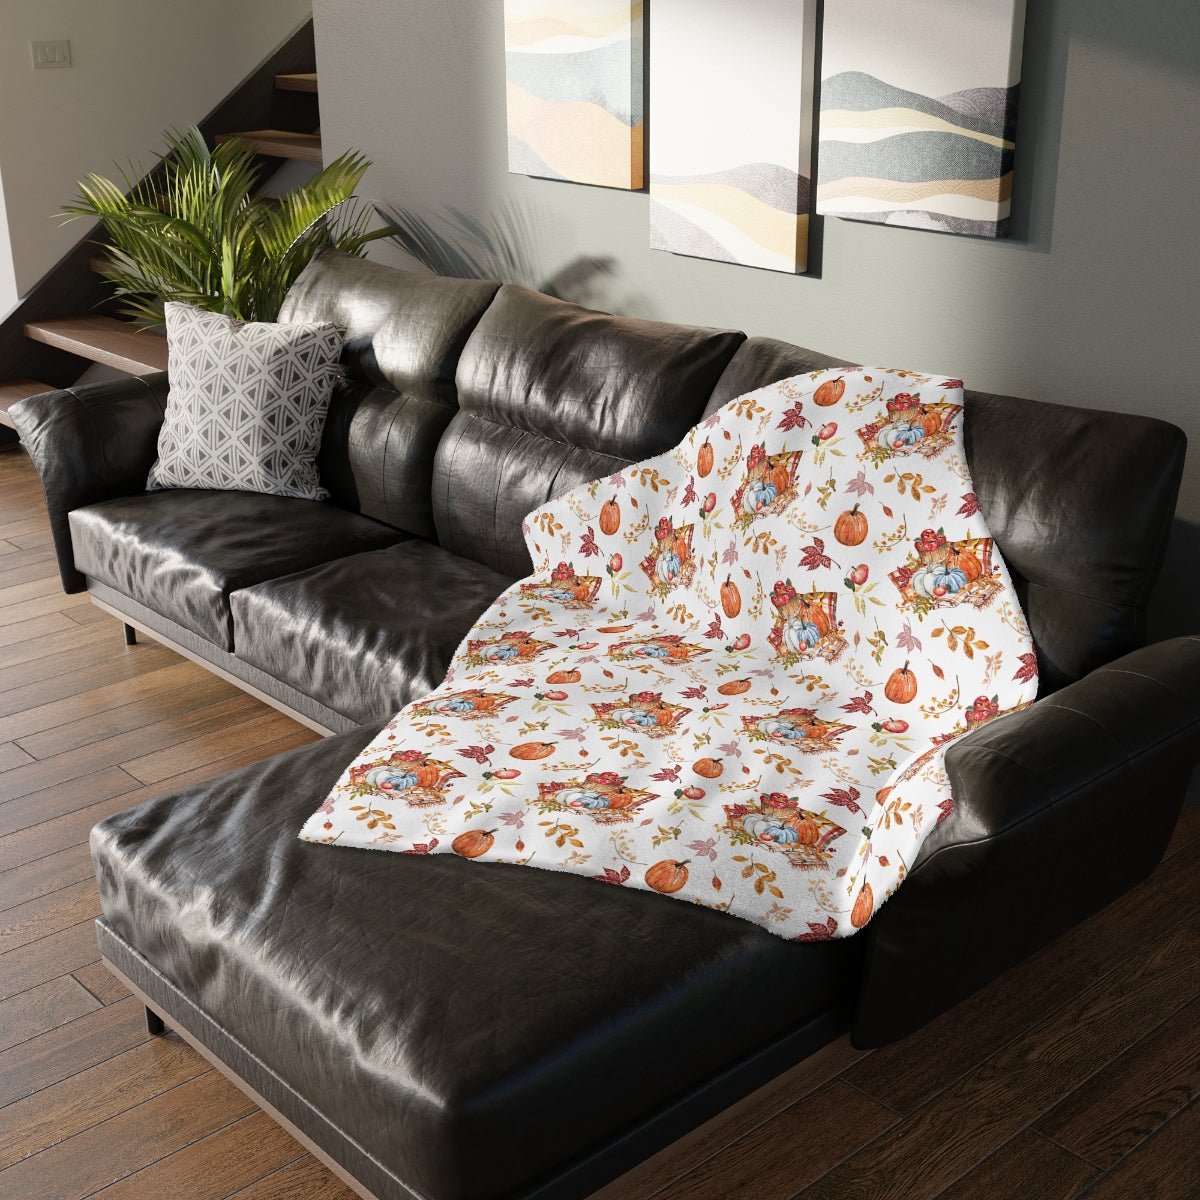 Fall Pumpkins and Apples Velveteen Minky Blanket (Two-sided print) - Puffin Lime